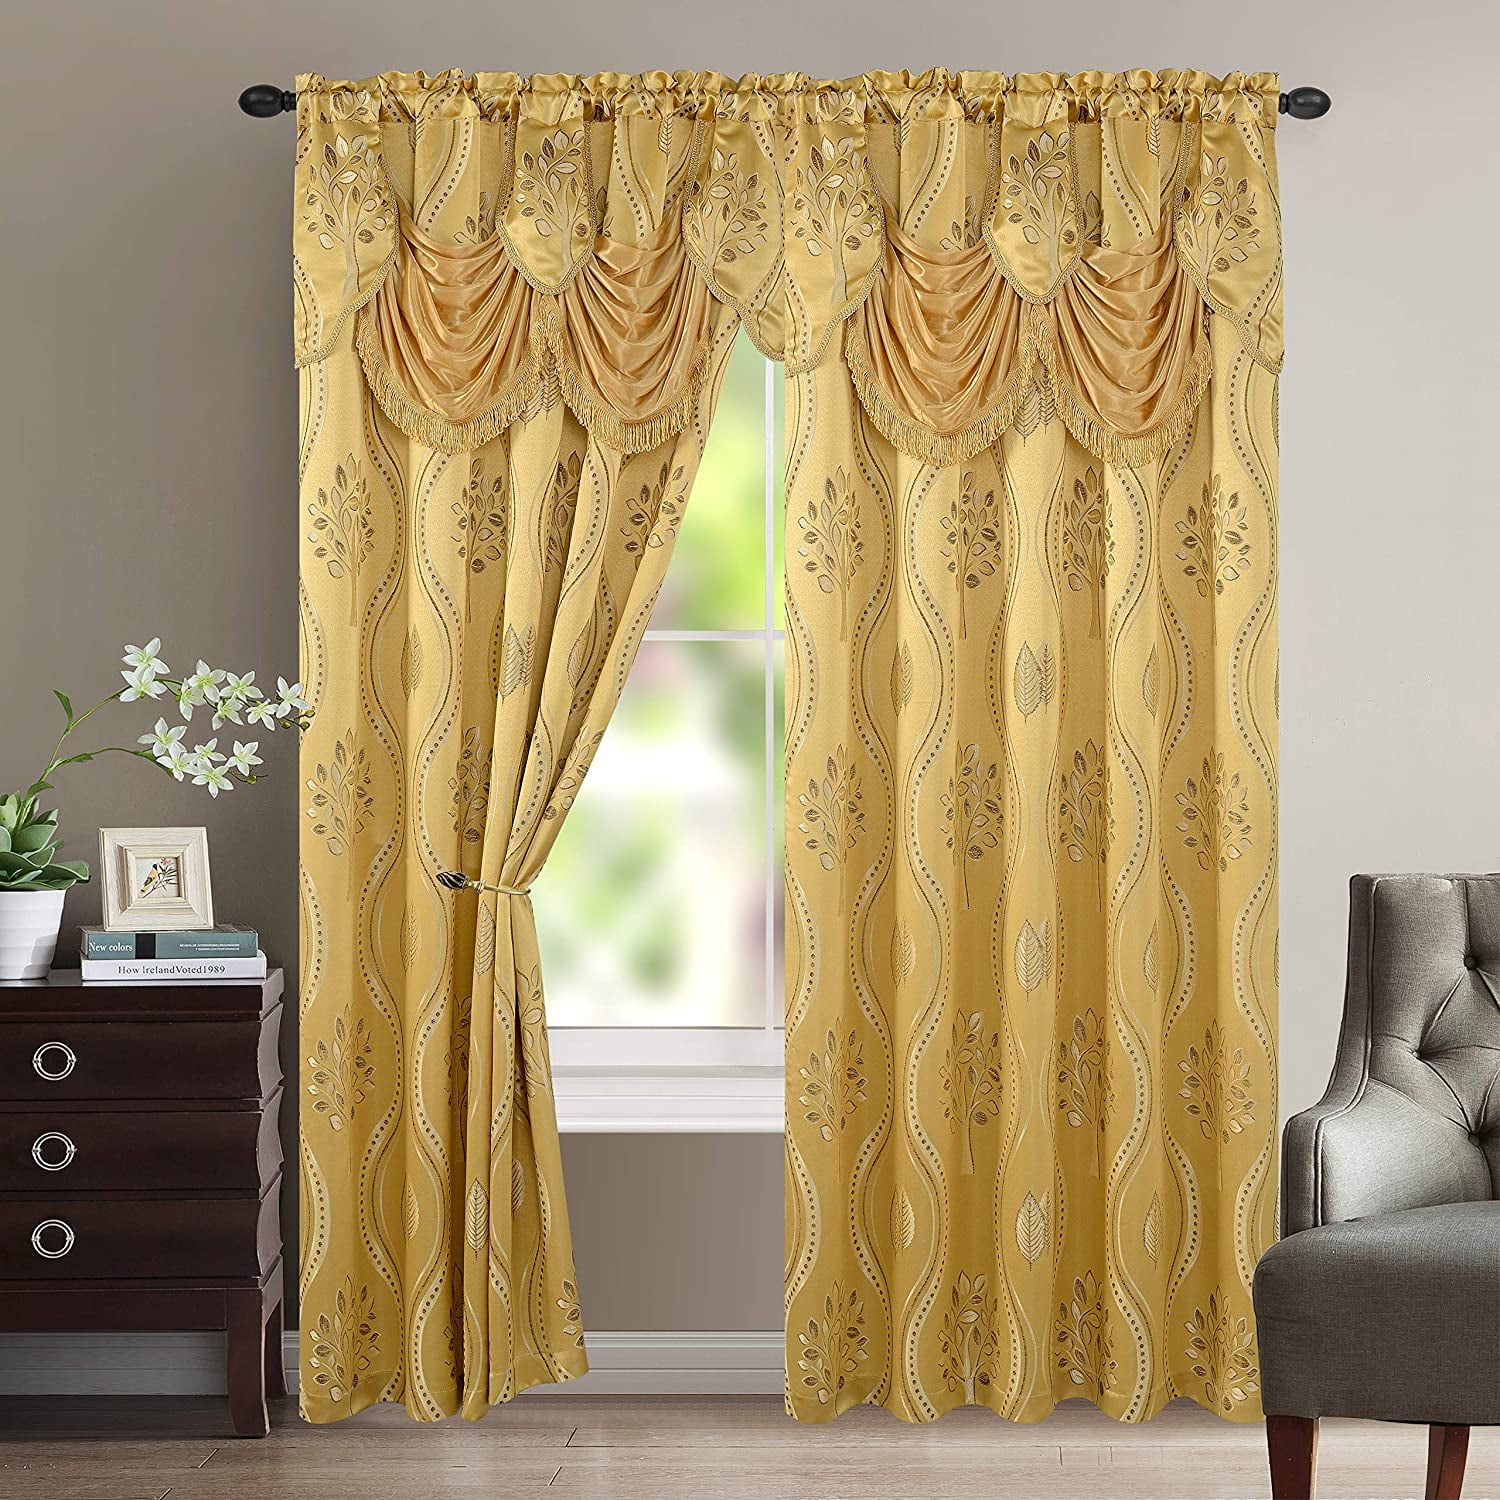 Penelopie Jacquard Look Curtain Panels, 54 by 84-Inch, Gold, Set of 2 ...